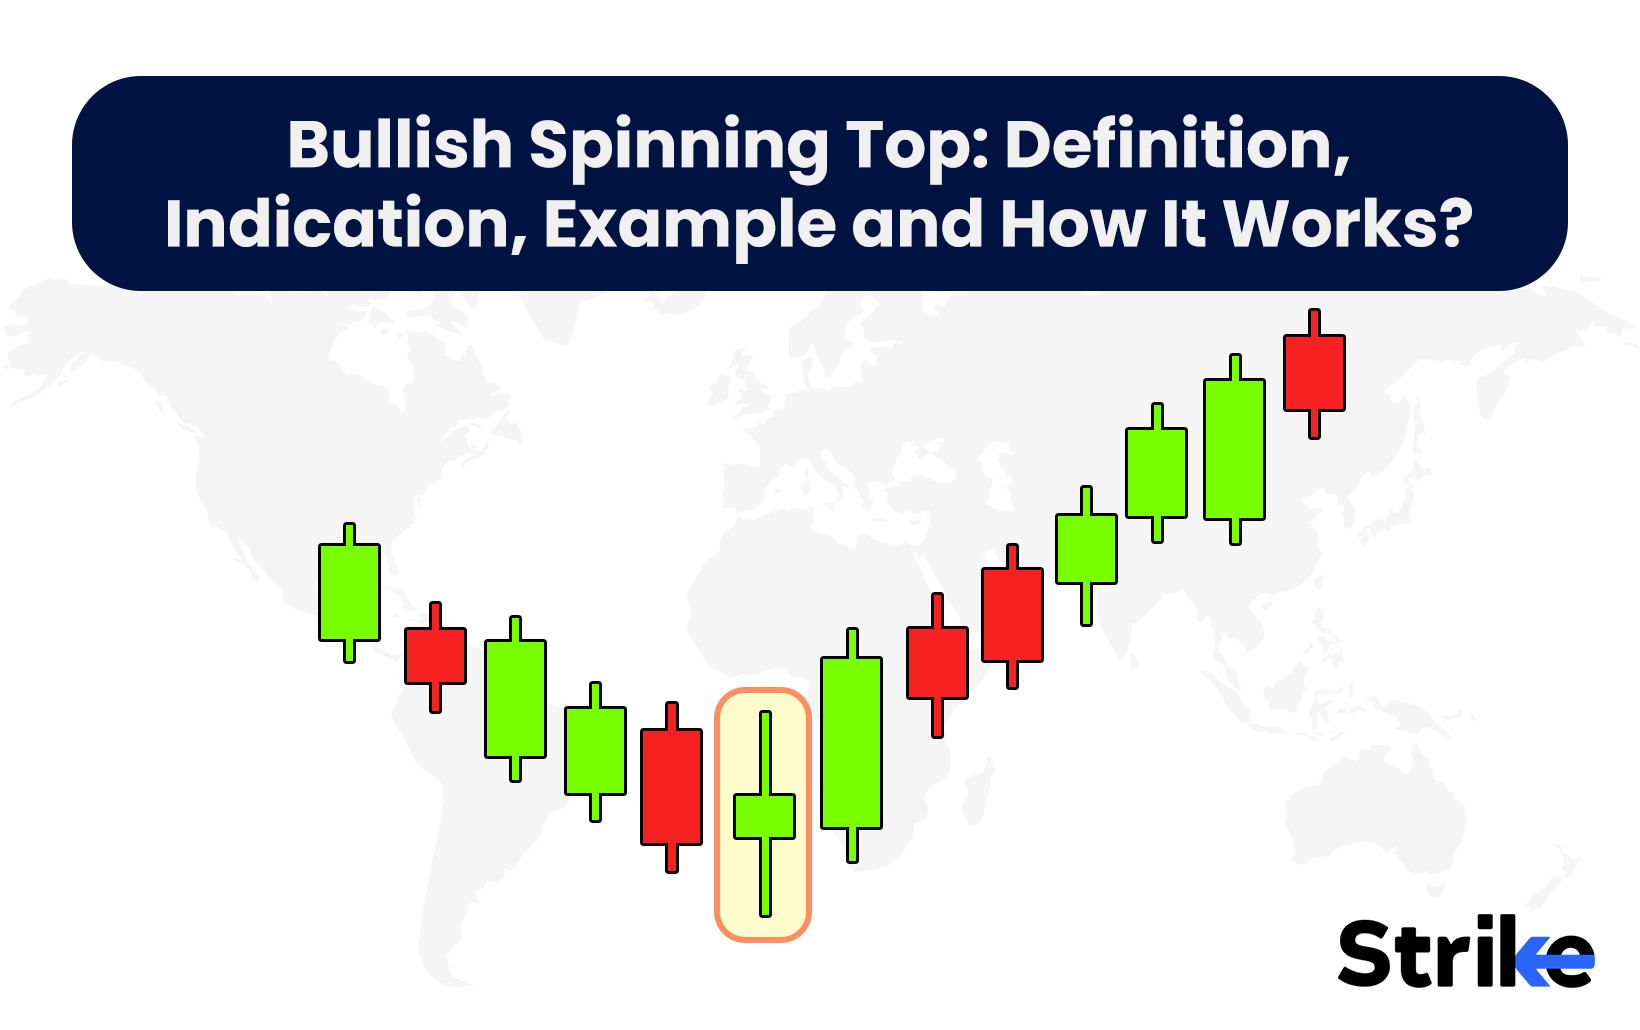 Bullish Spinning Top: Definition, Indication, Example and How It Works?